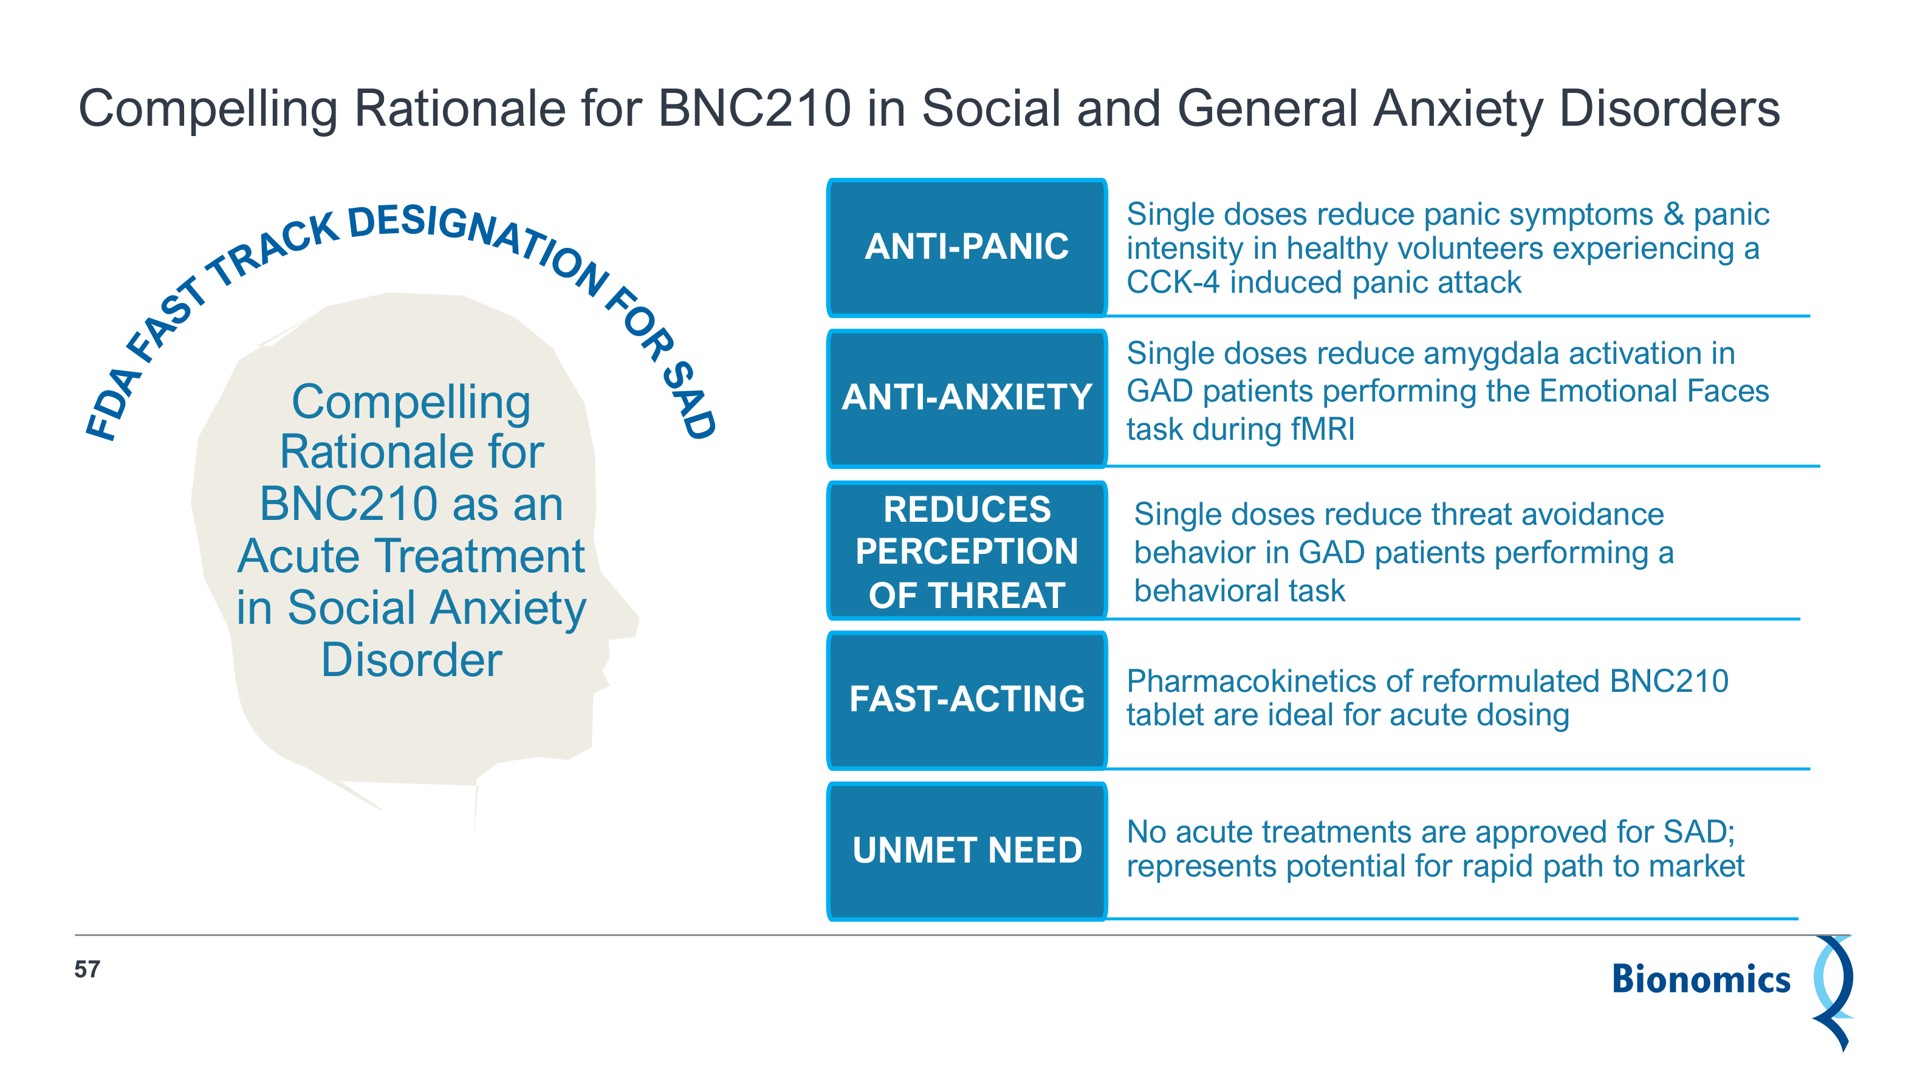 compelling rationale for in social and general anxiety disorders task | Bionomics